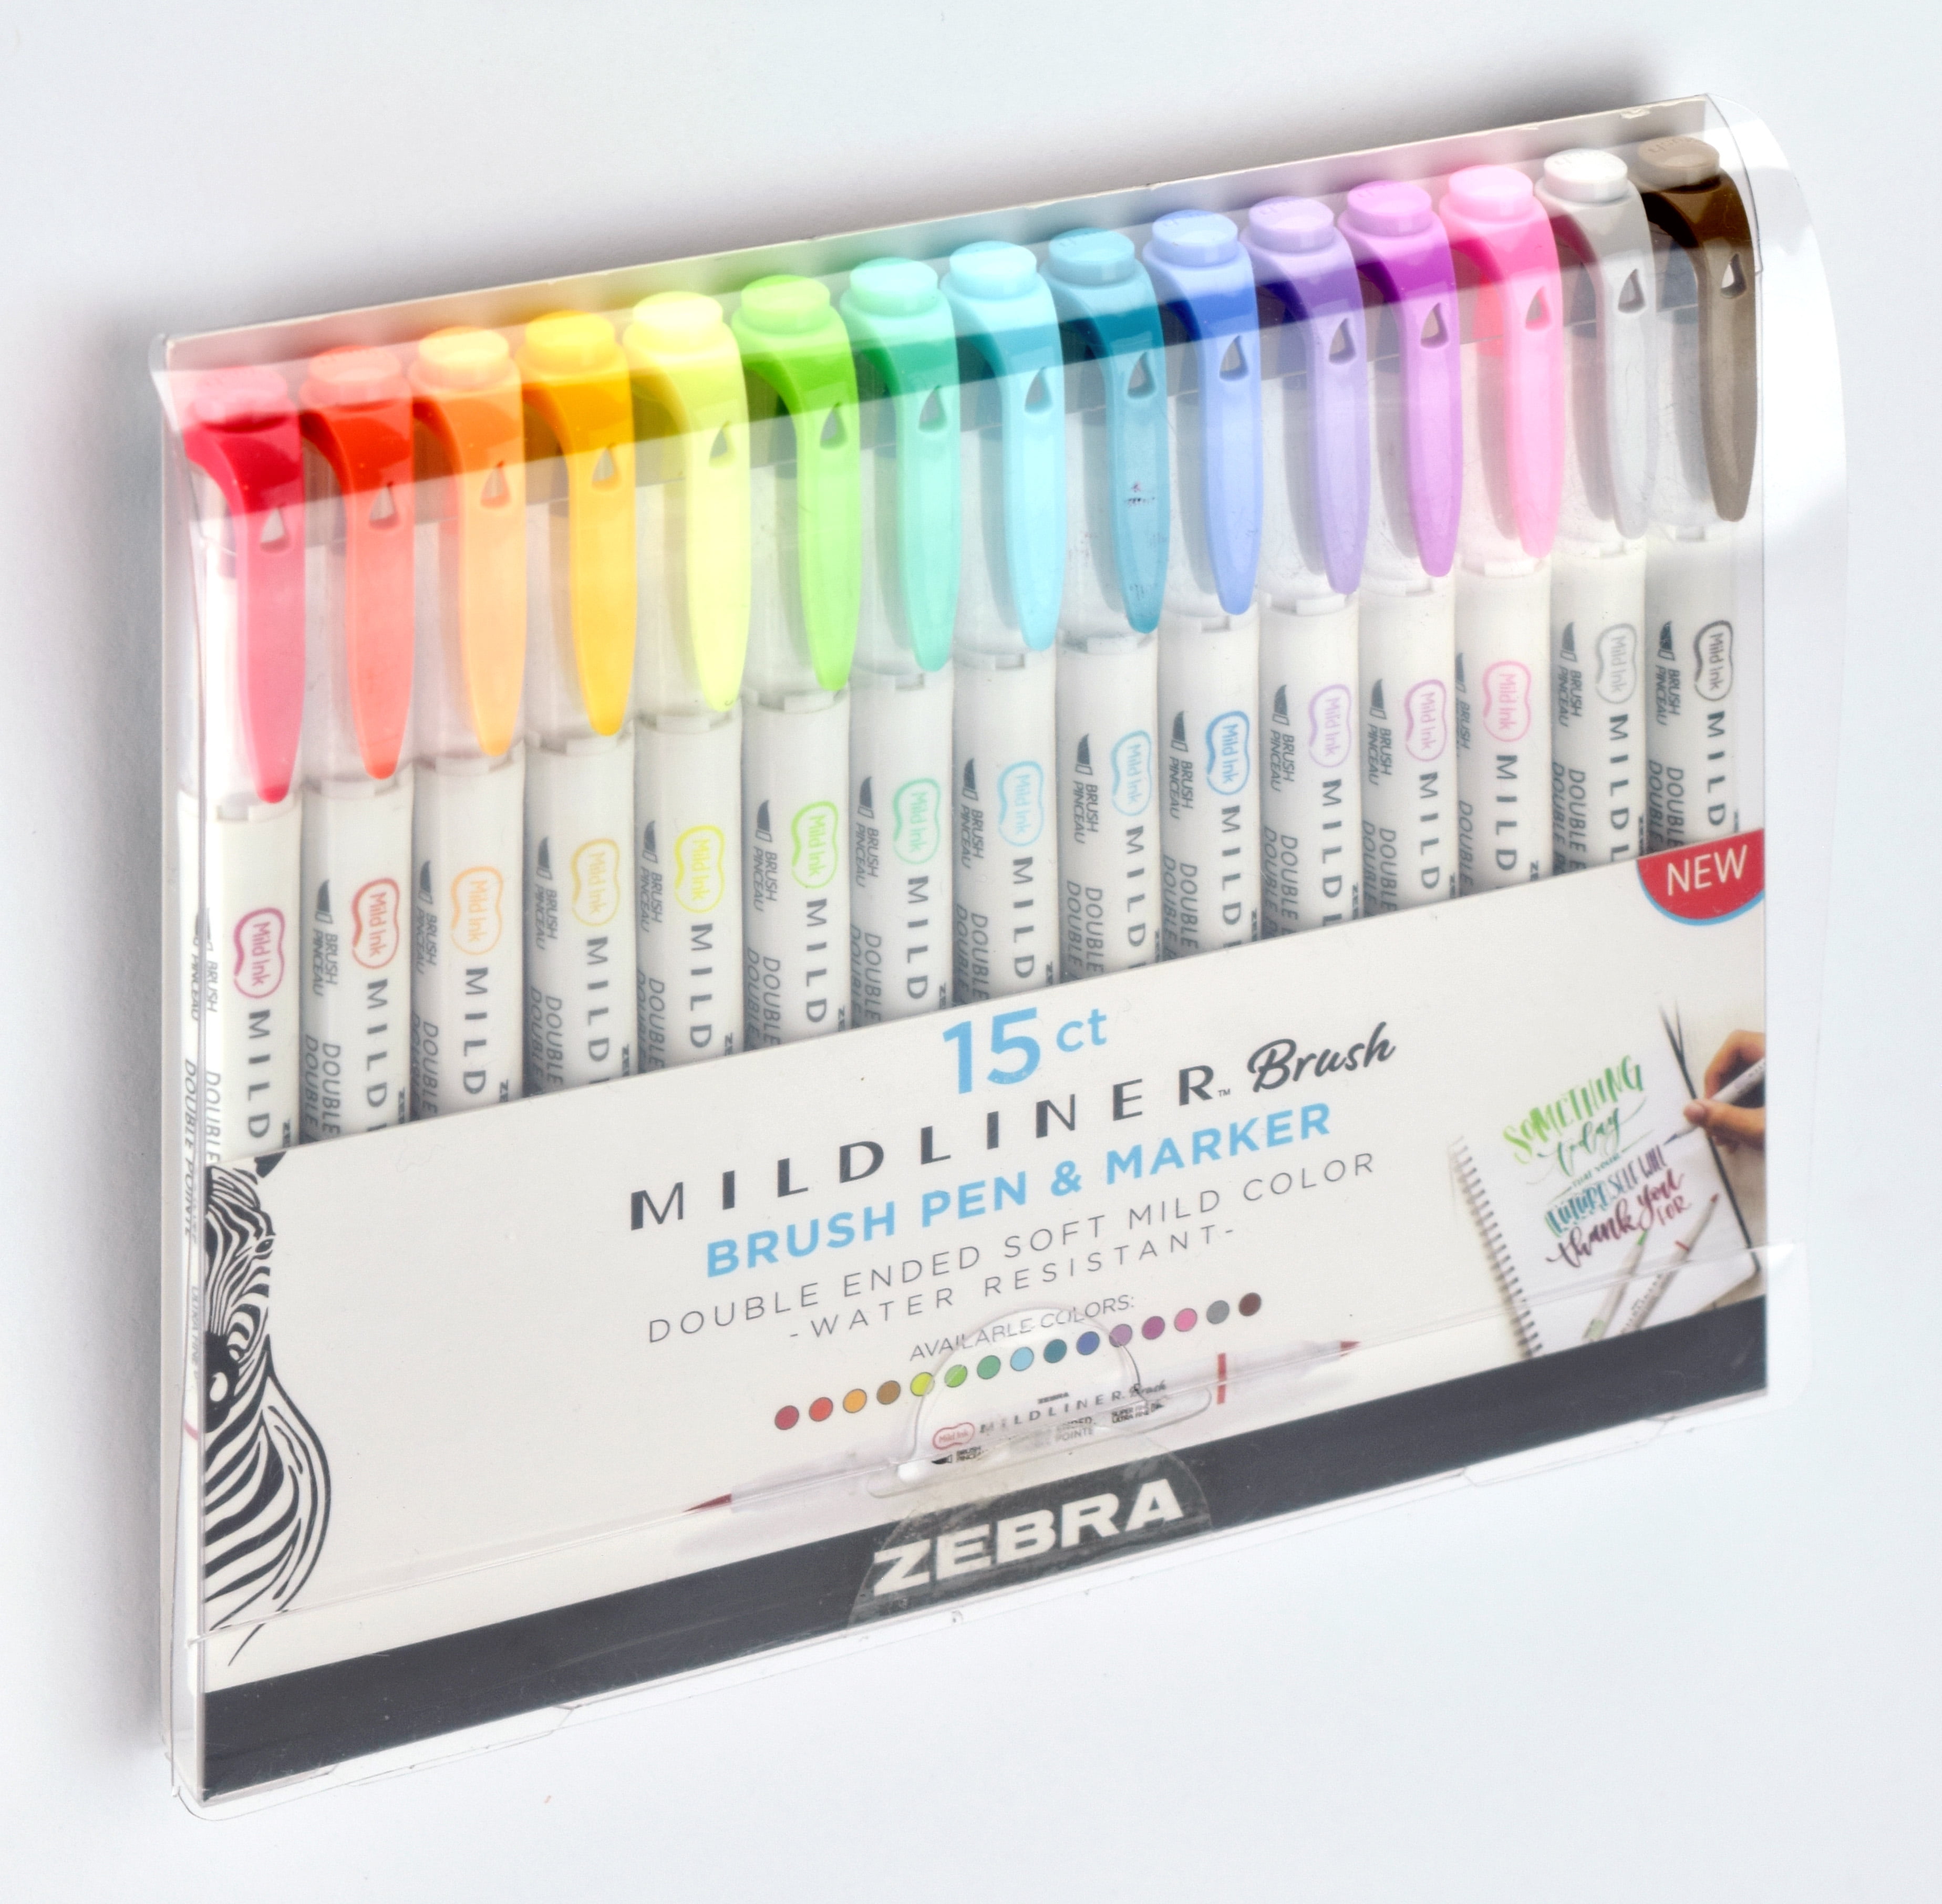  Zebra Pen Mildliner Brush Marker, Double Ended Brush and Fine  Tip Pen, Assorted Soft Colors, 15 Count (Pack of 1) : Office Products